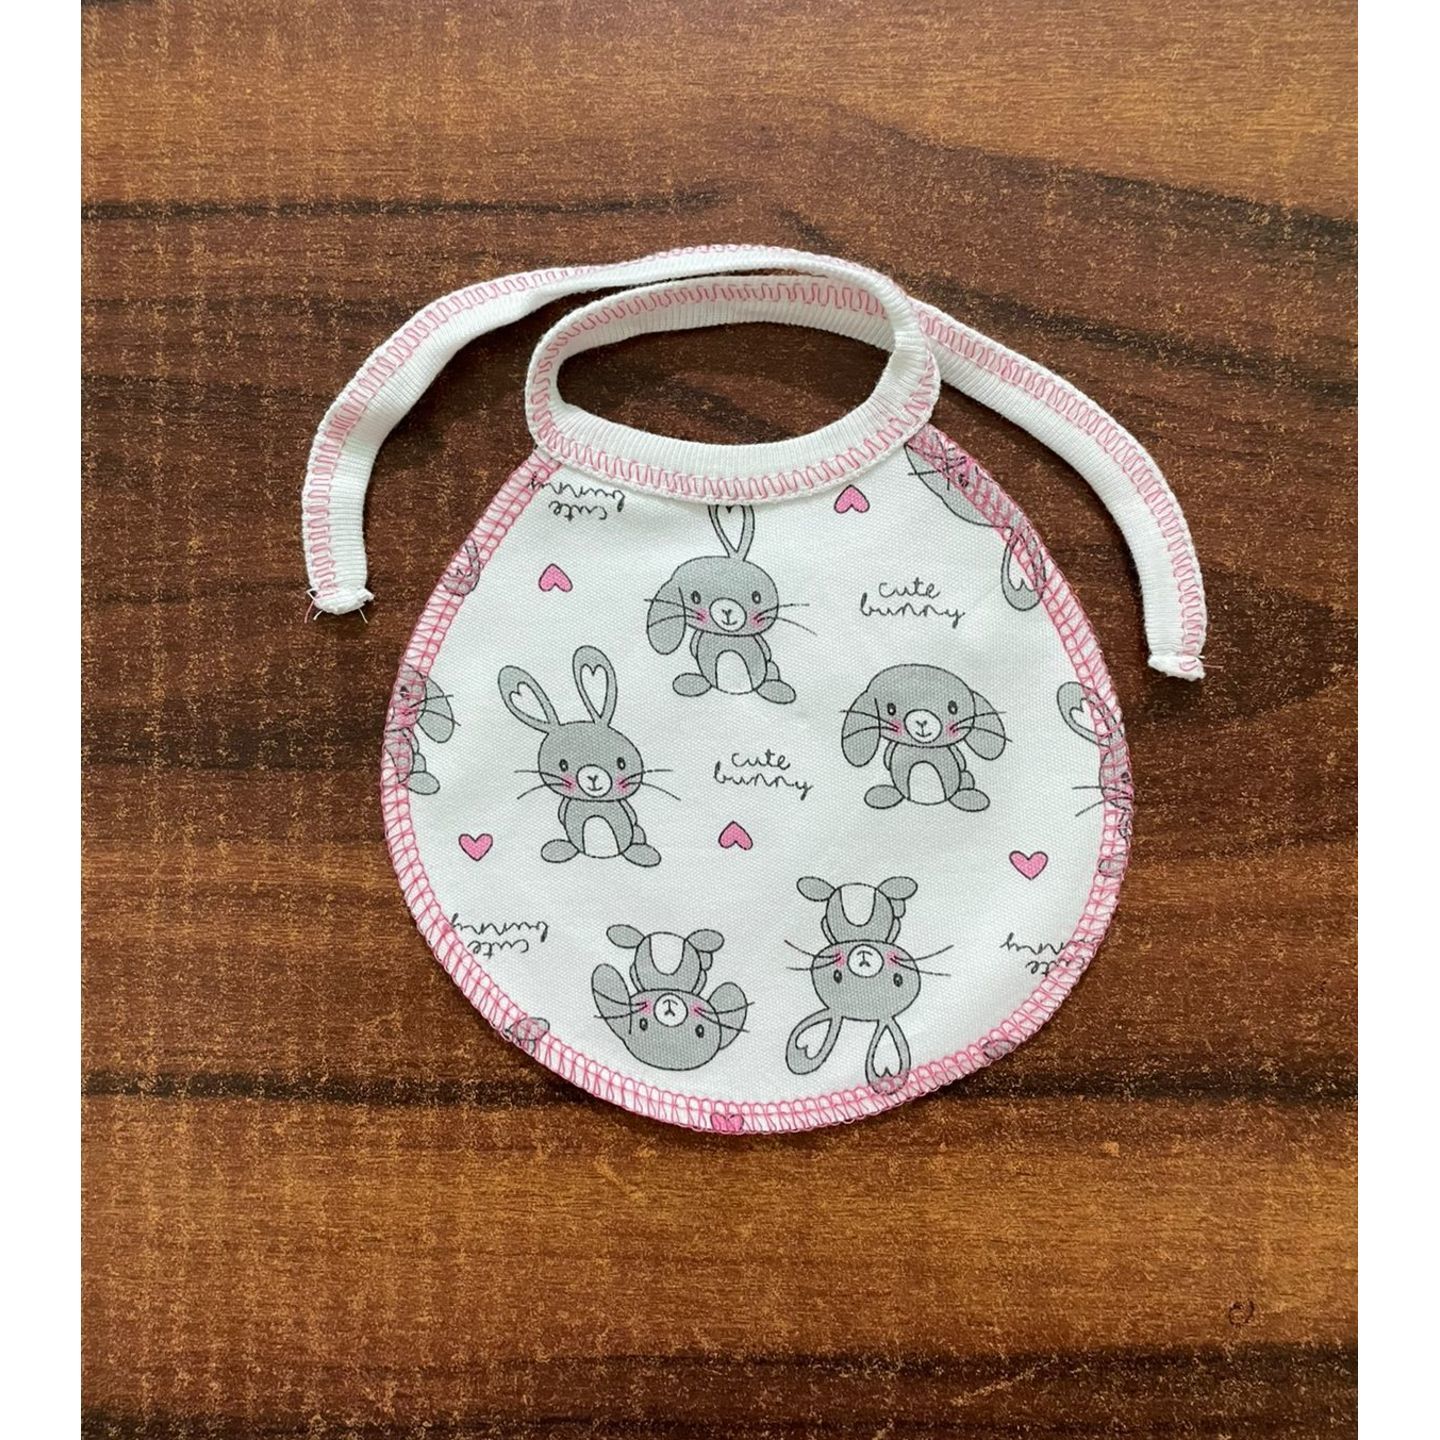 Cradle Togs Bib Rs 75 Only Made in India